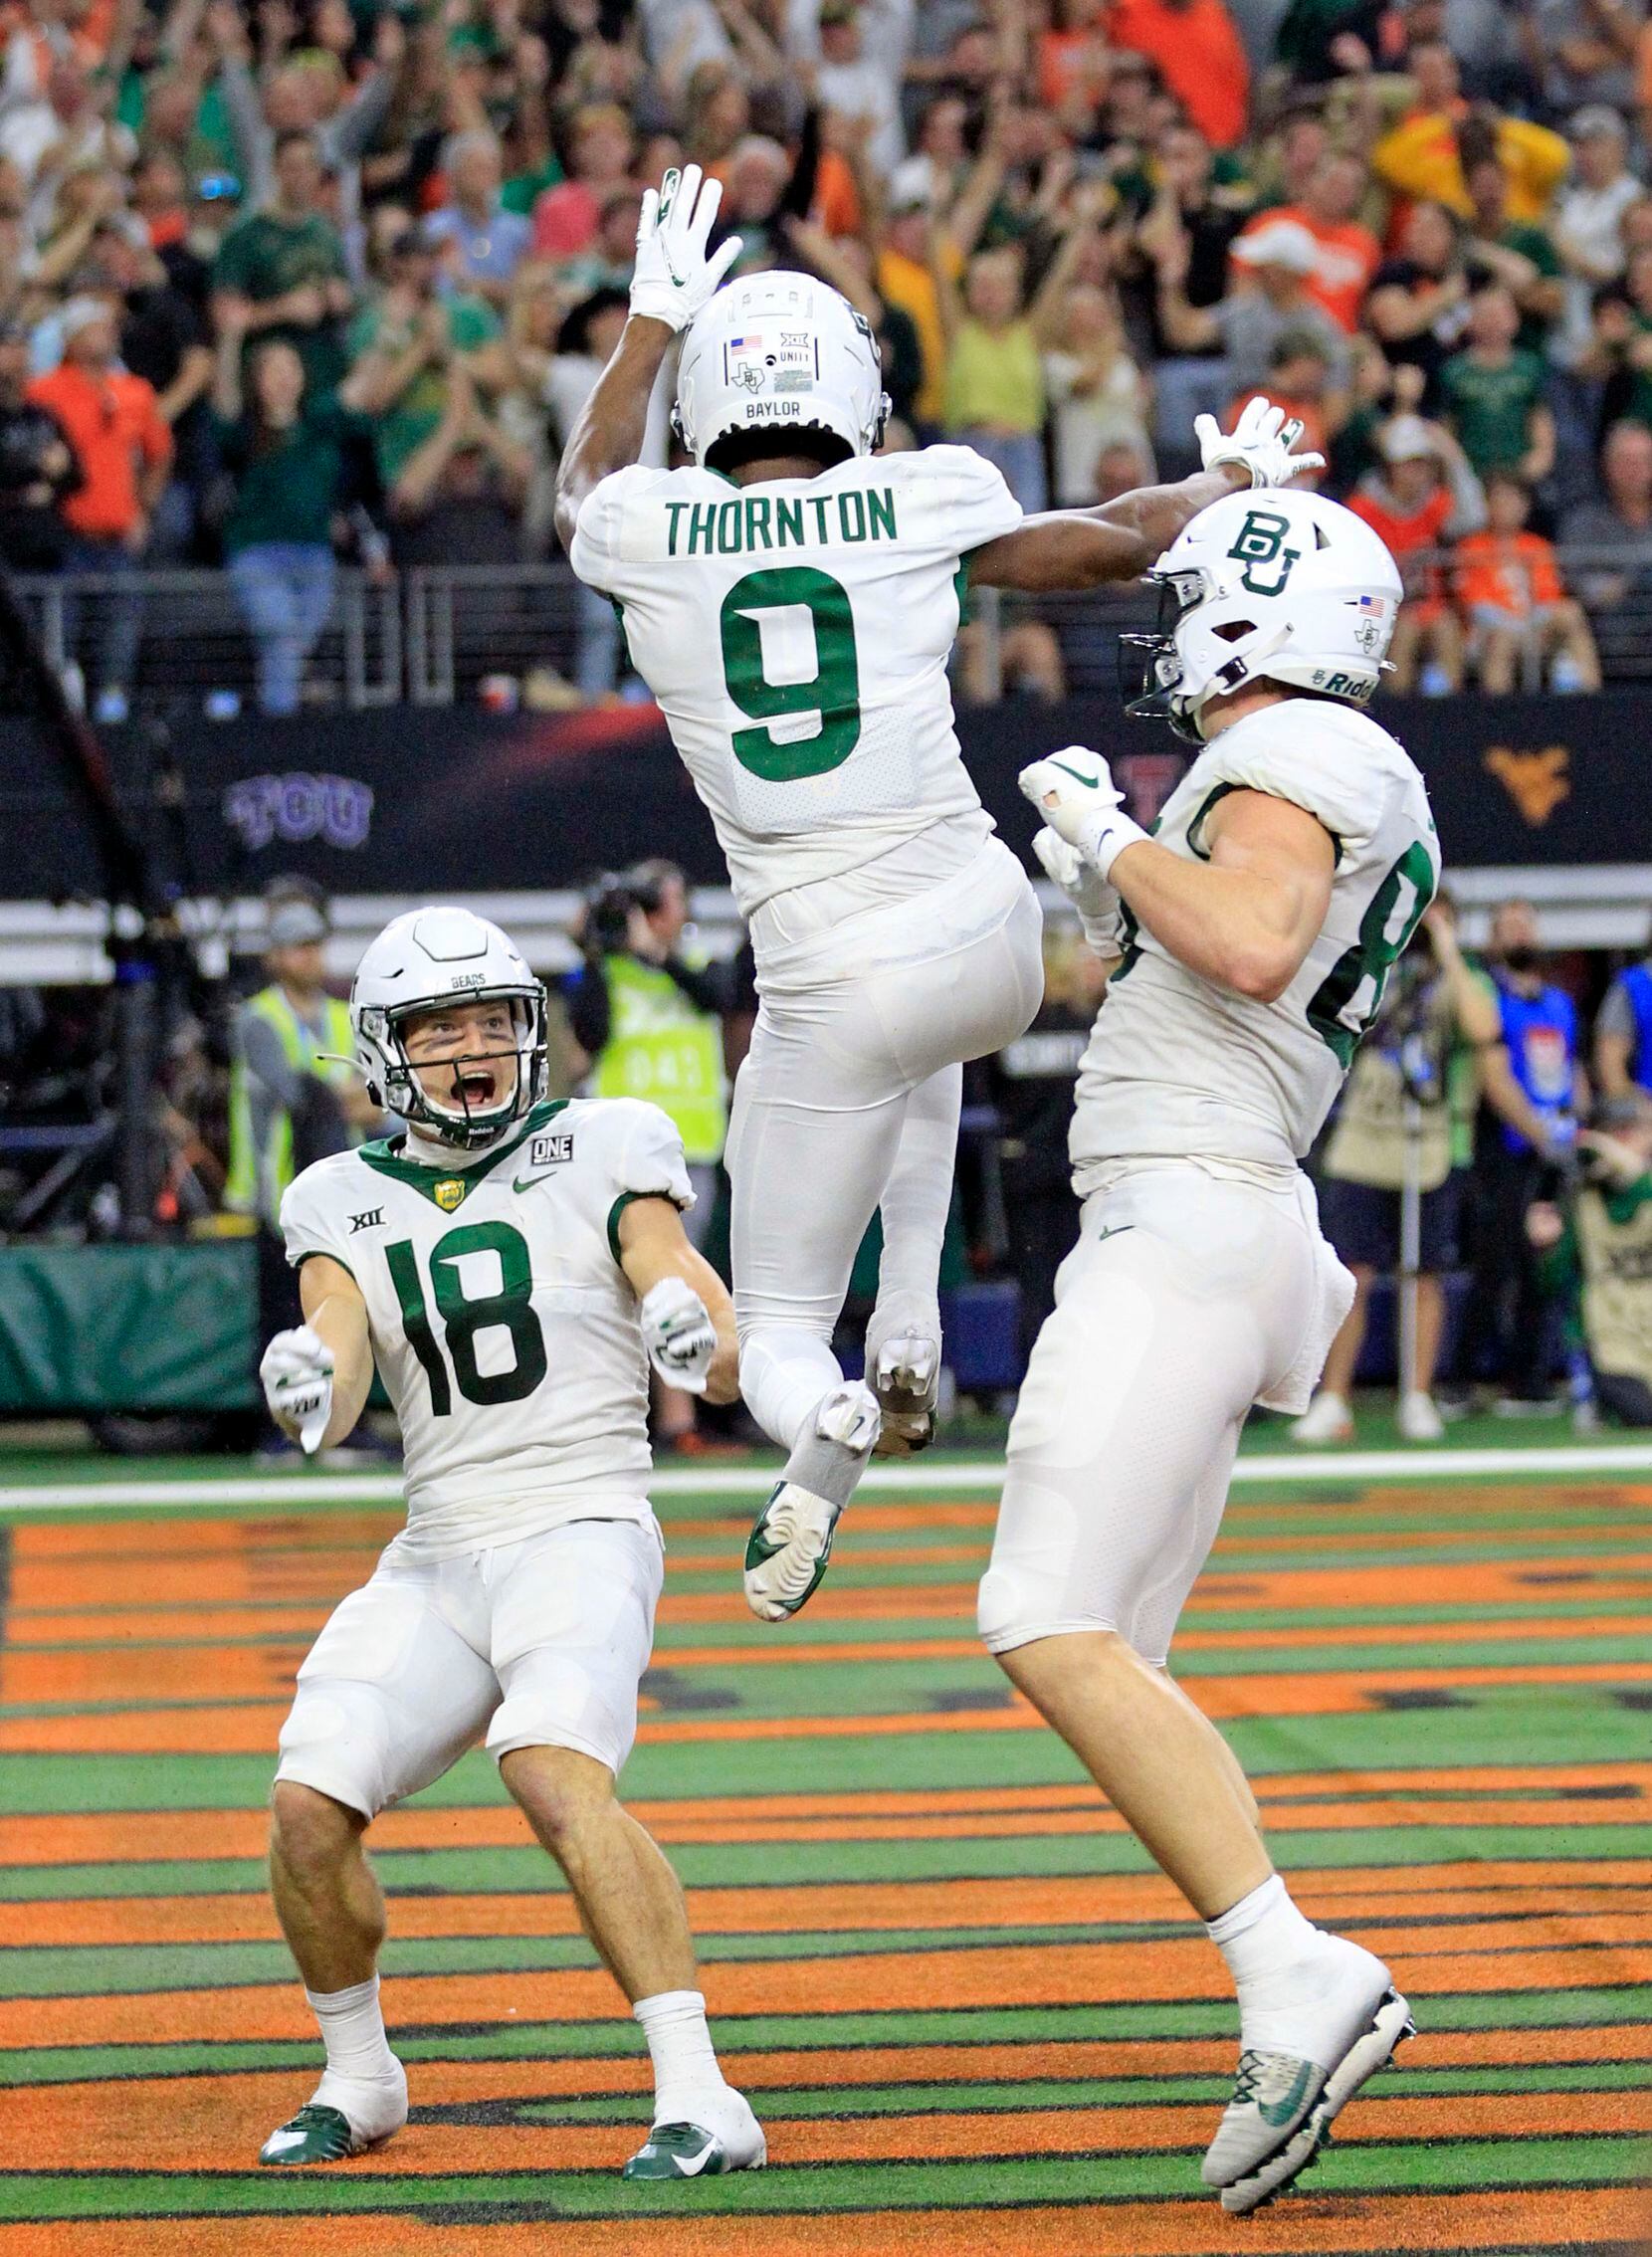 Baylor Bears wide receiver Tyquan Thornton (9) celebrates with teammates, including Baylor Bears wide receiver Drew Estrada (18), after catching a touchdown pass during first half of the Big 12 Championship football game against Oklahoma State at AT&T Stadium in Arlington on Saturday, December 4, 2021. (John F. Rhodes / Special Contributor)